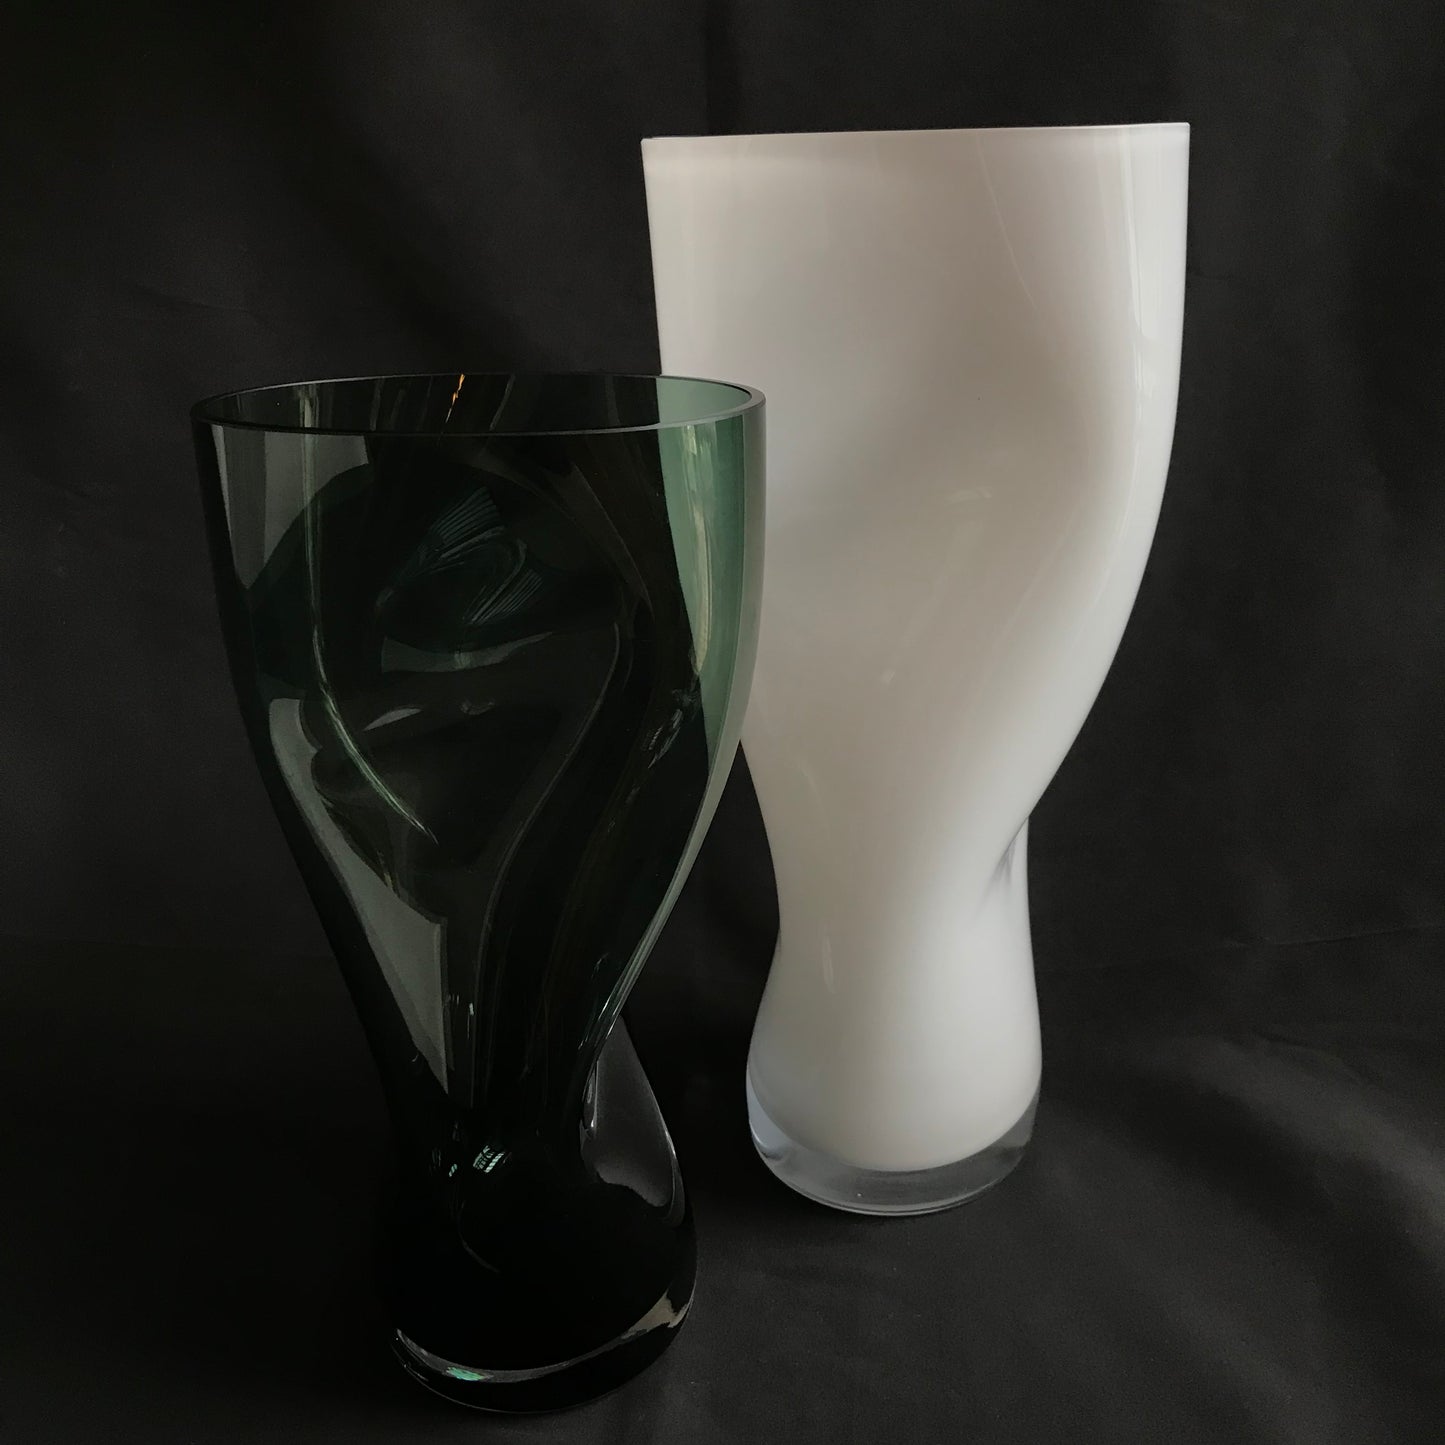 Green Glass “Squeeze Vase” by Orrefors.